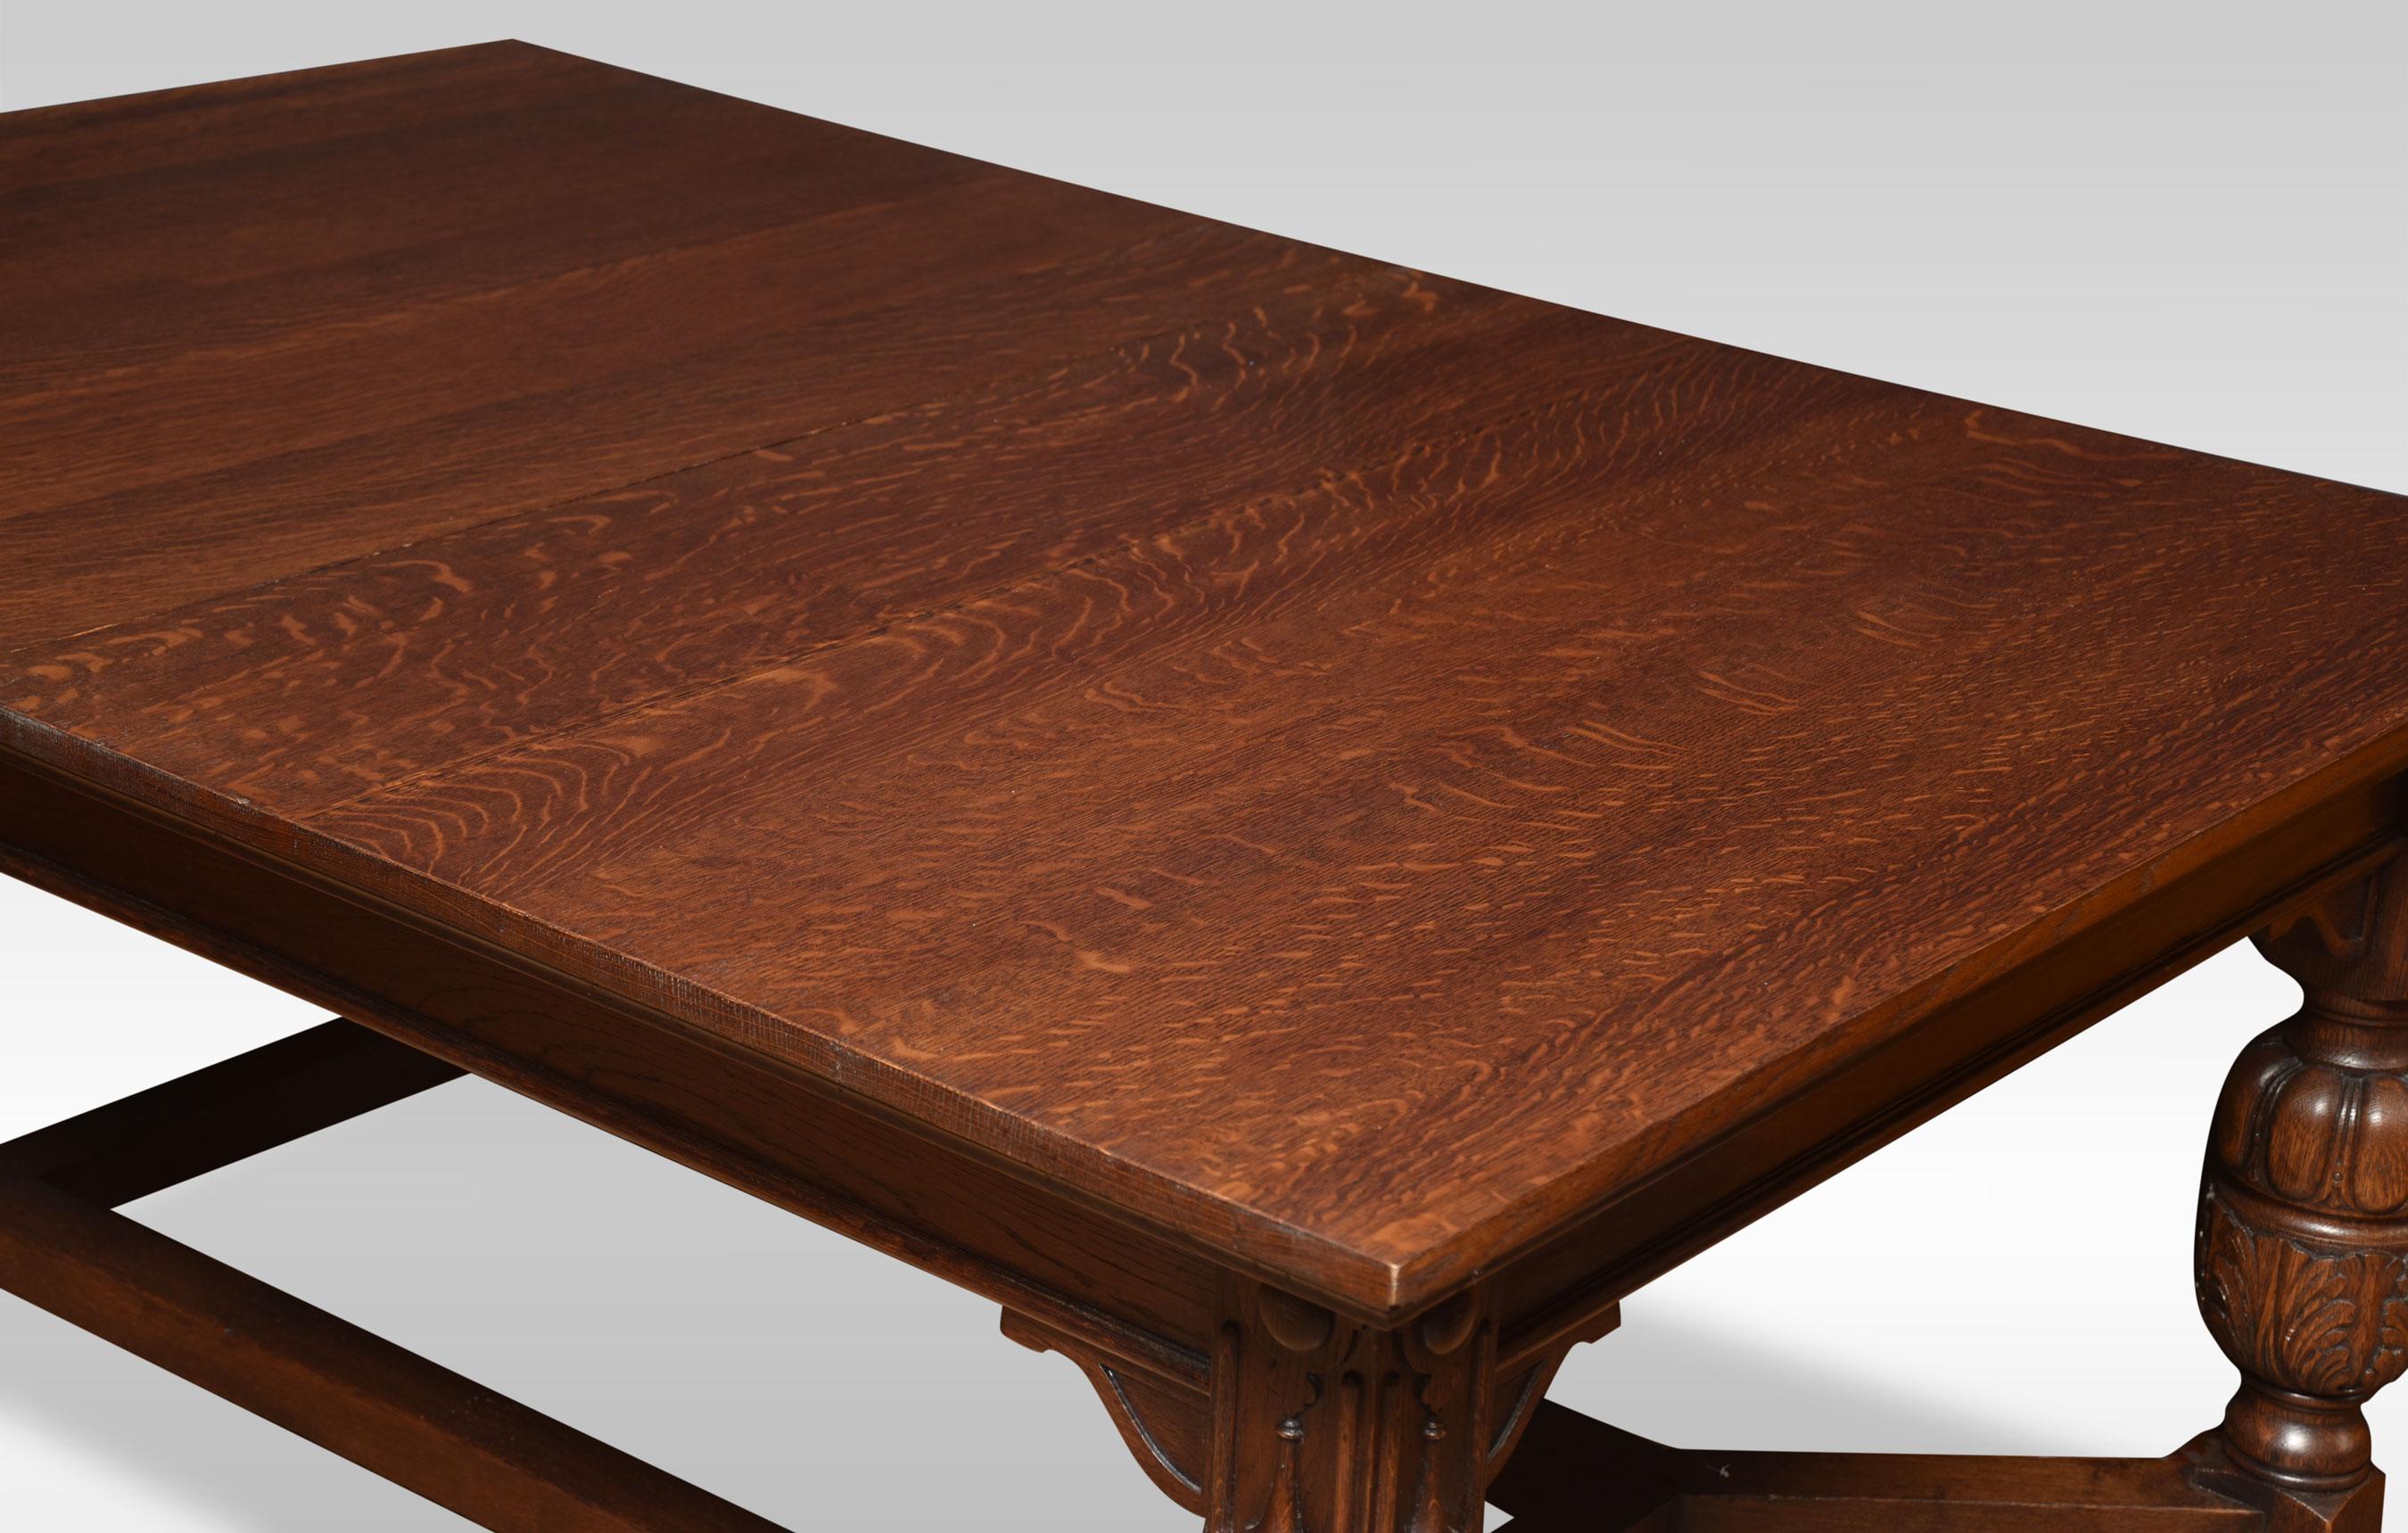 Oak dining table of generous proportions. The well-figured top has pull-out ends to incorporate two original oak leaves. To the moulded freeze raised up on cup & cover legs leading down to bun feet united by stretchers.
Dimensions:
Height: 30